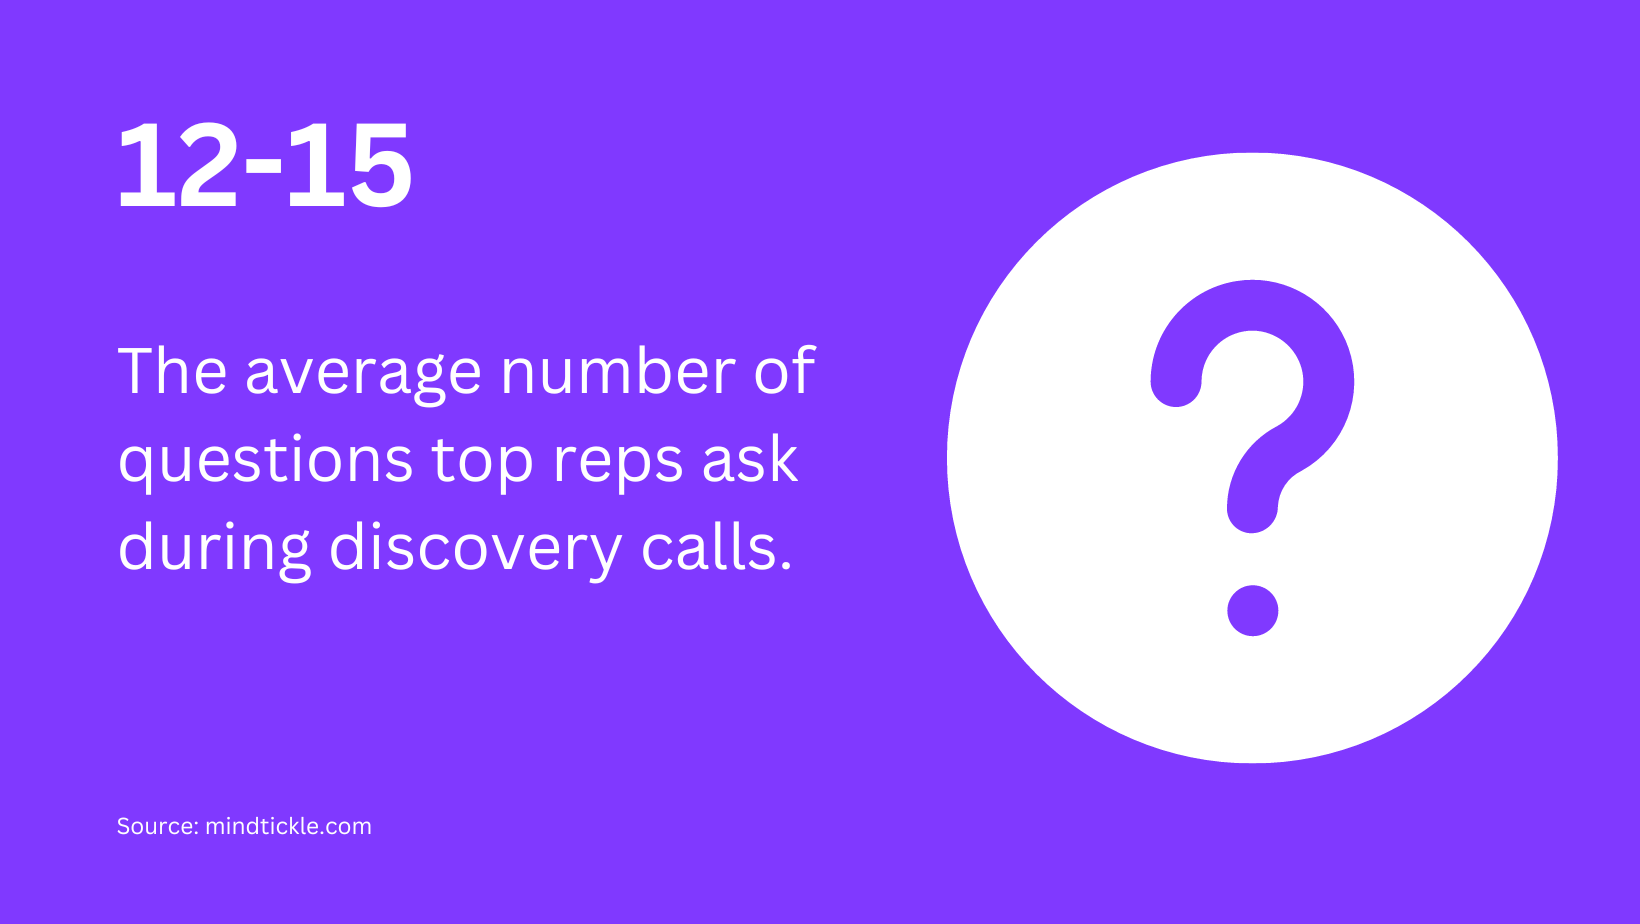 Average number of questions to ask on discovery calls statistic